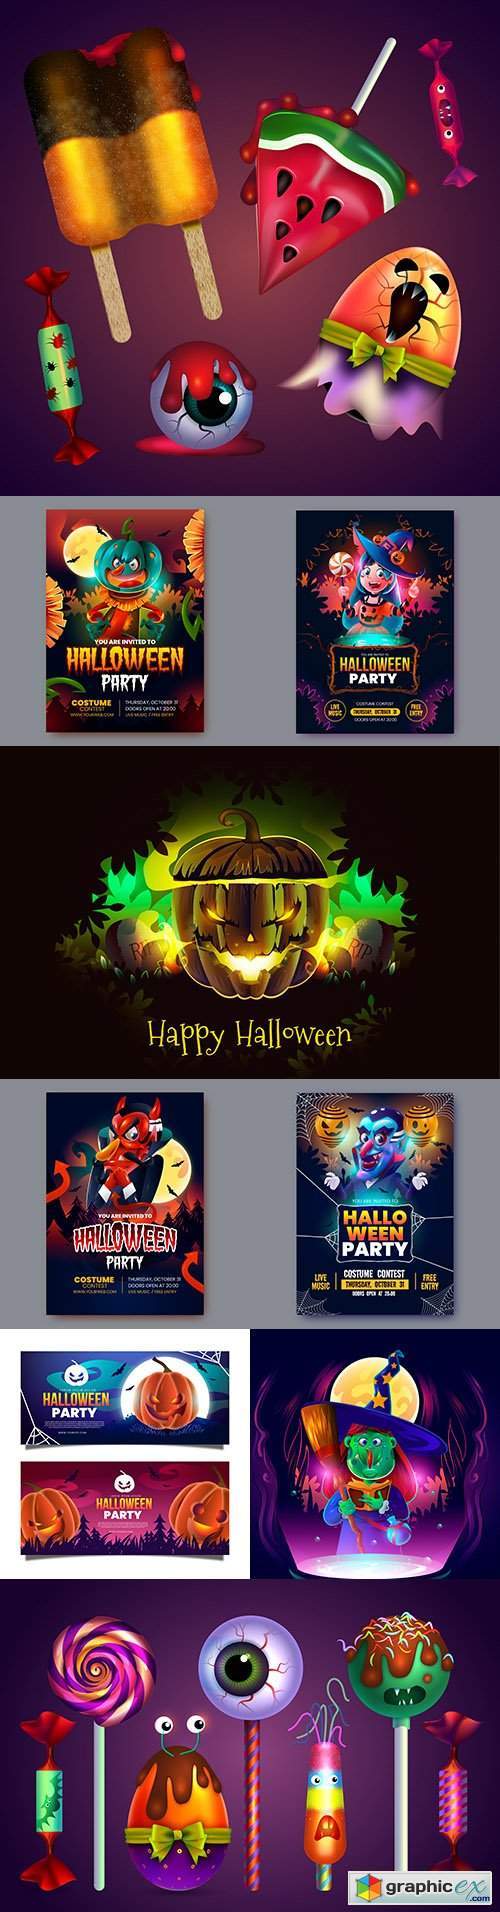 Happy Halloween holiday banner realistic illustration collection